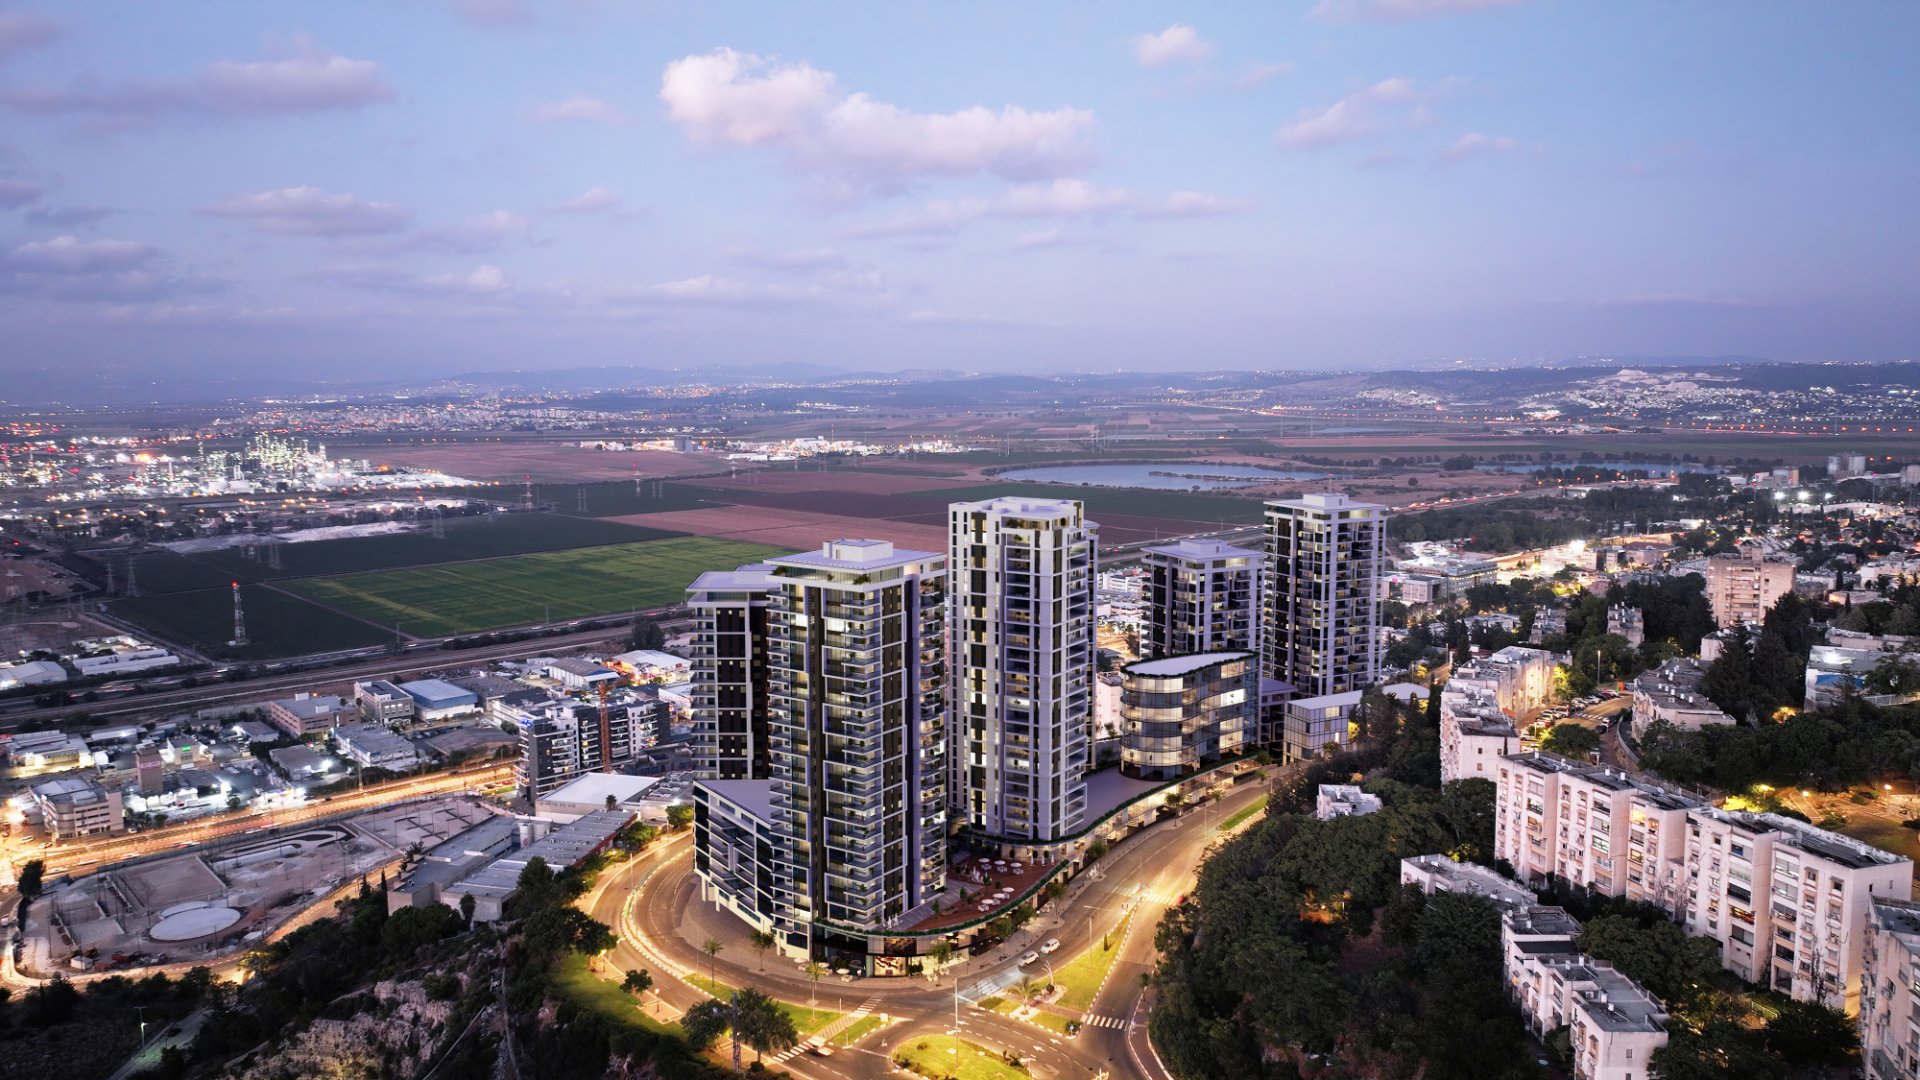 Photograph of few Bulidings in Nesher project in the evening